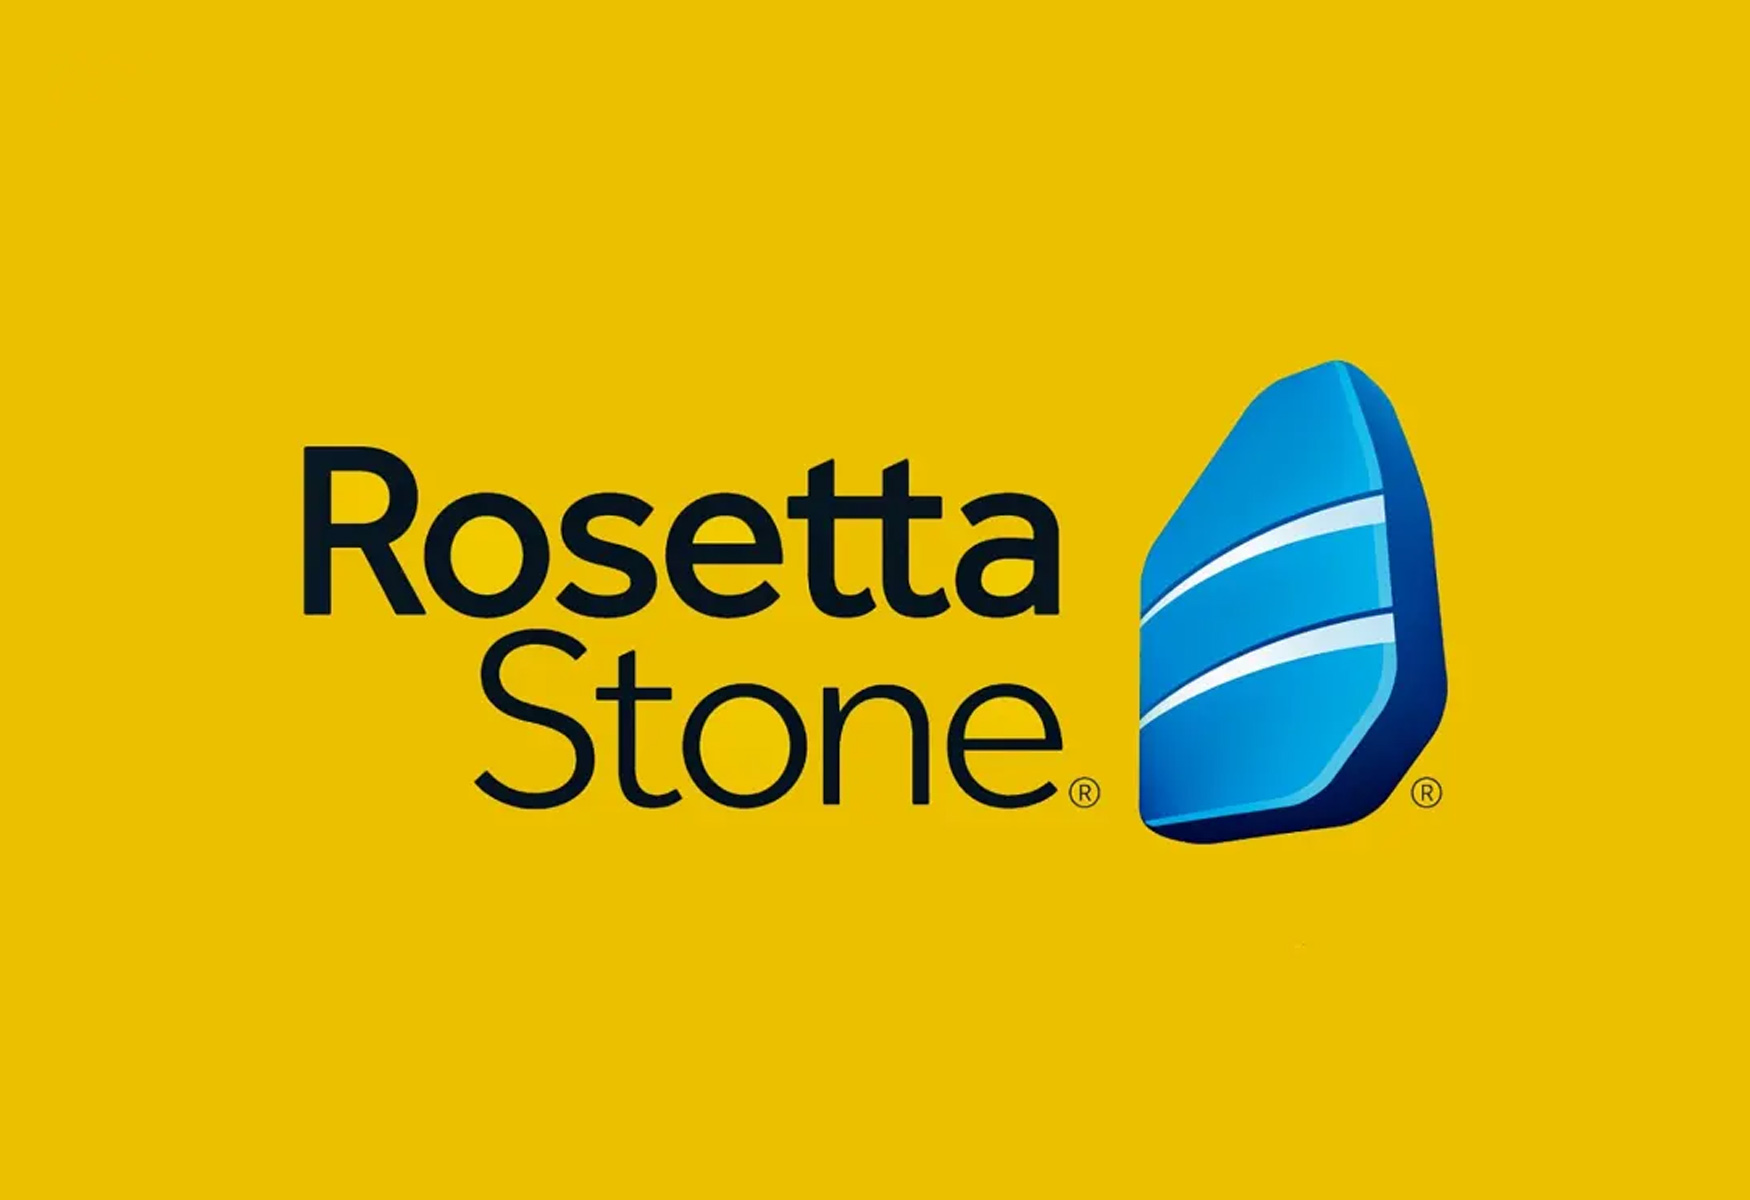 learn-a-new-language-with-rosetta-stone-lifetime-subscription-on-sale-for-150